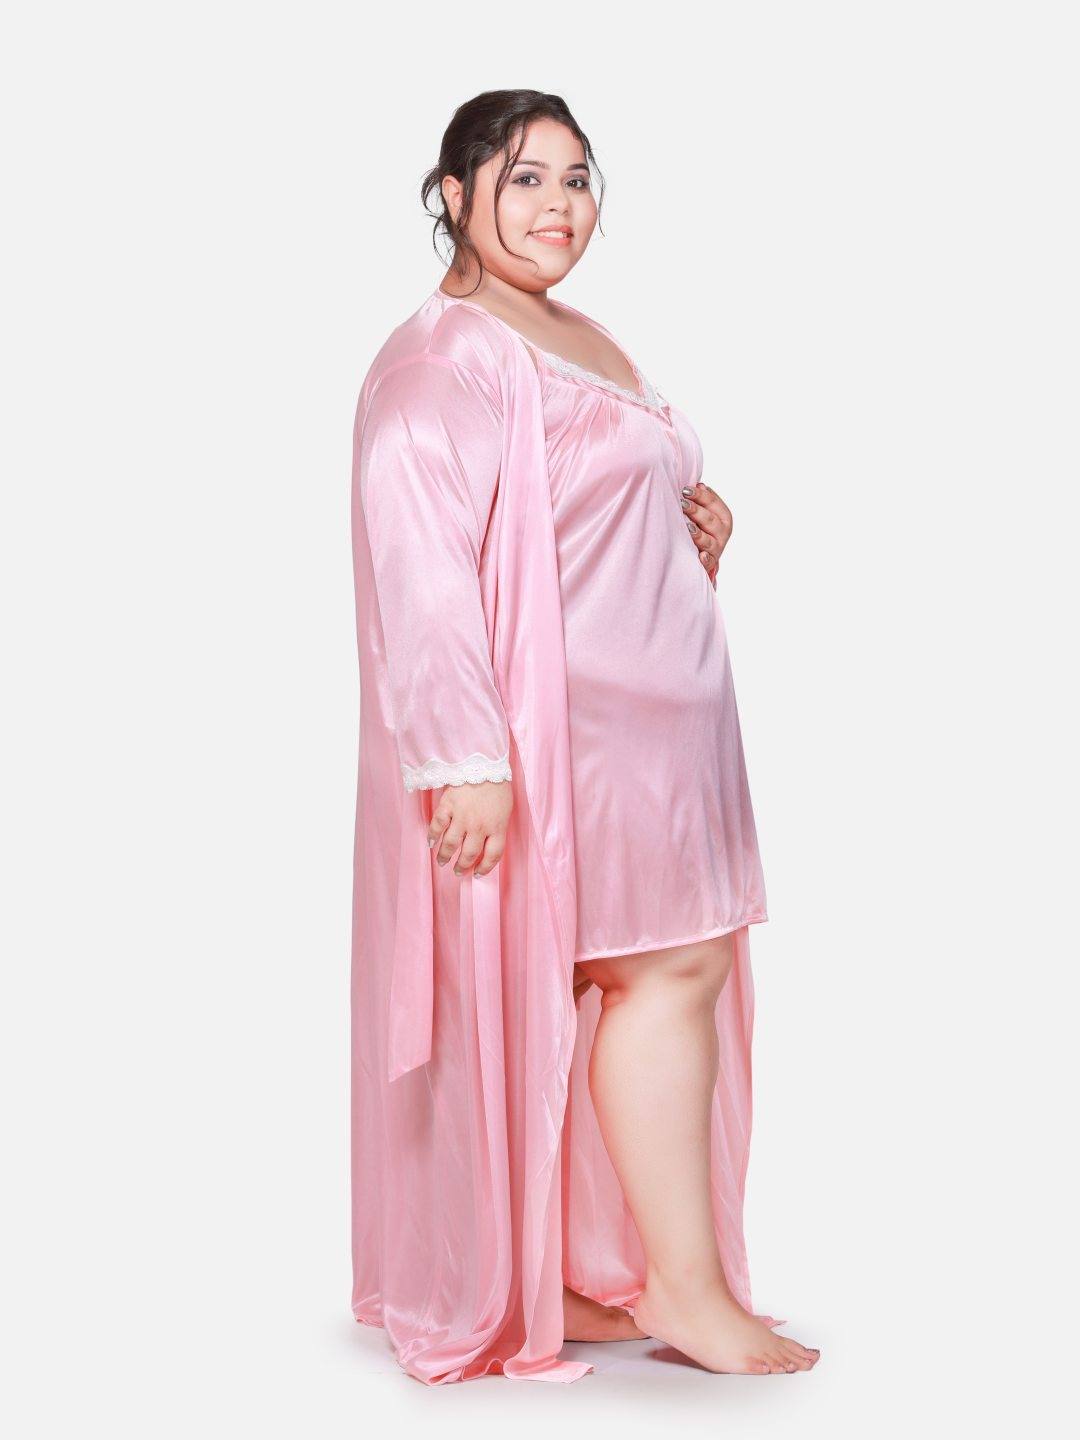 Plus Size Hot Two Piece Light Pink Babydoll Night Dress for Women 302Hl